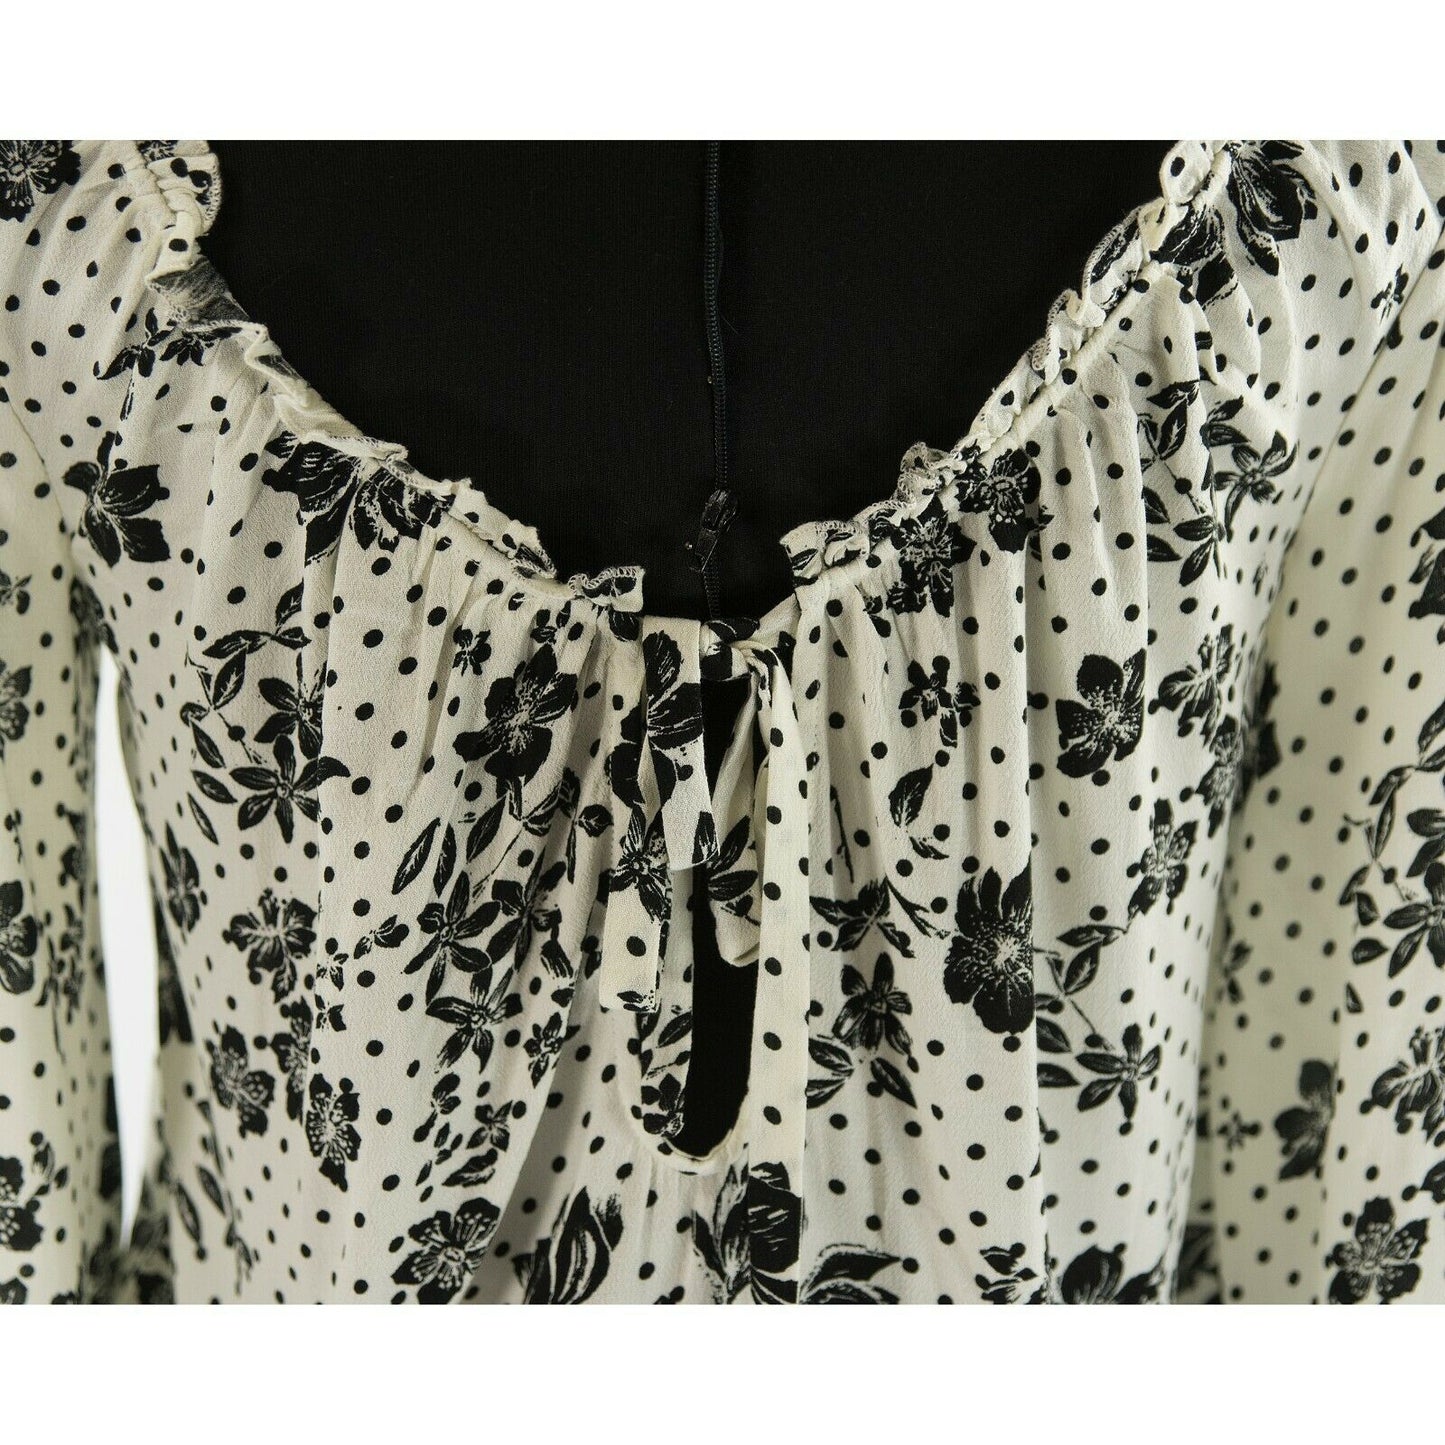 Free People Black White Floral Peasant Bell Sleeve Blouse Thong Bodysuit XS